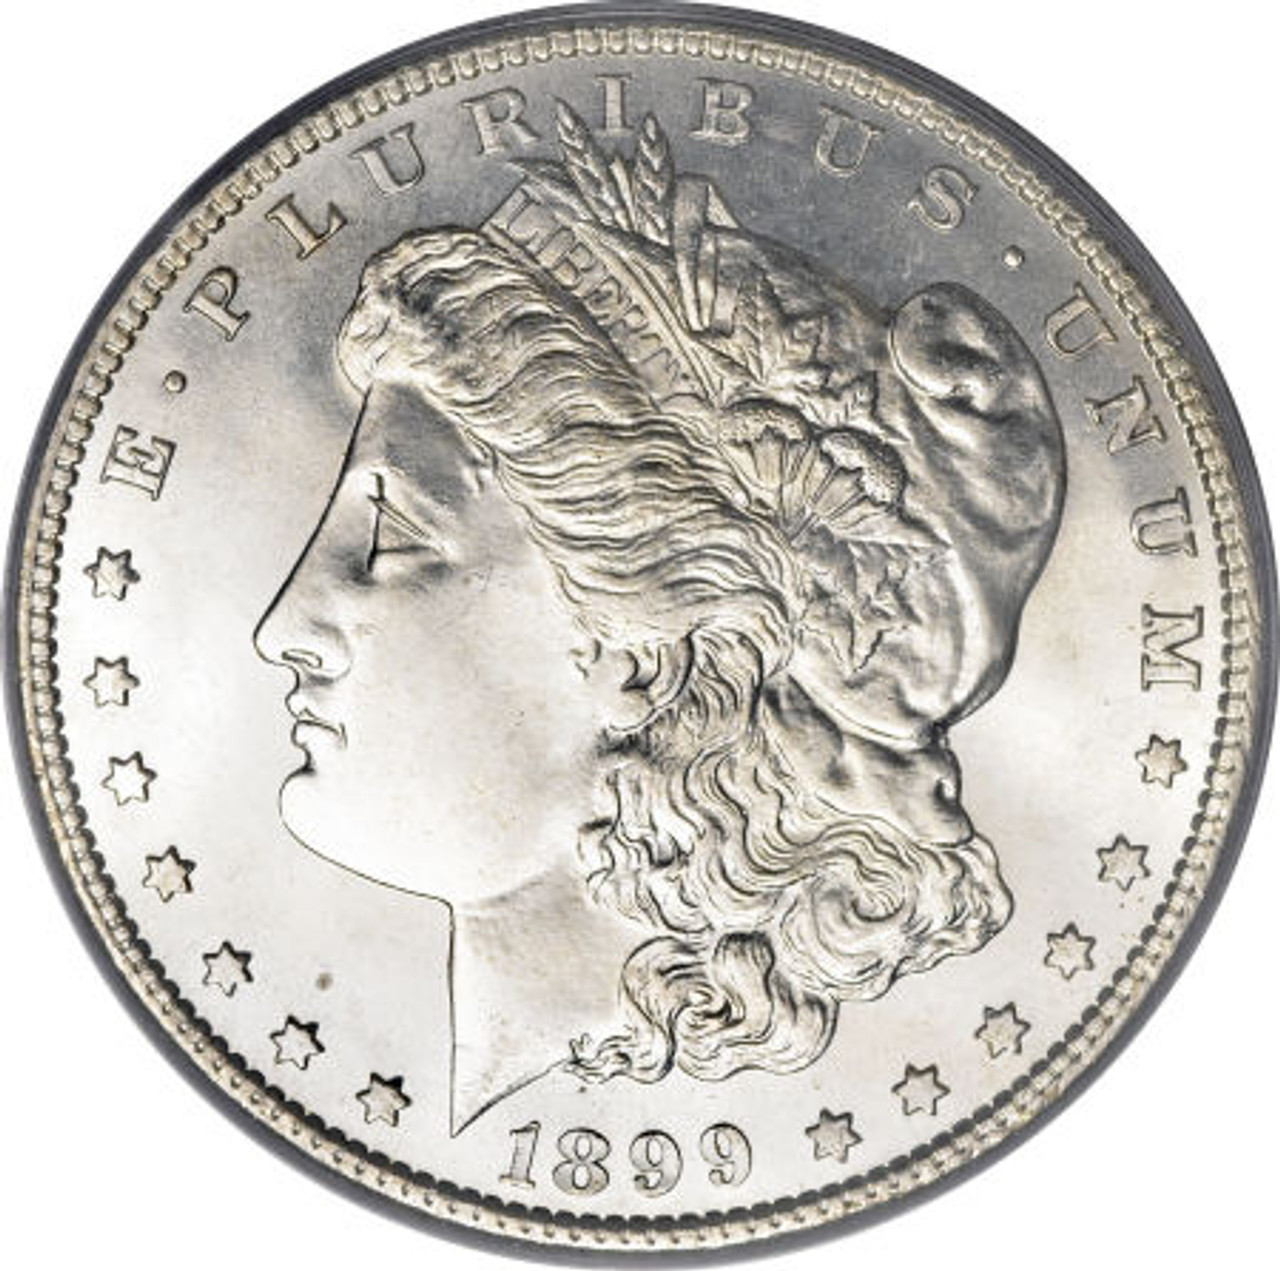 1899-O Morgan Silver Dollar (Extremely Fine to Almost Uncirculated